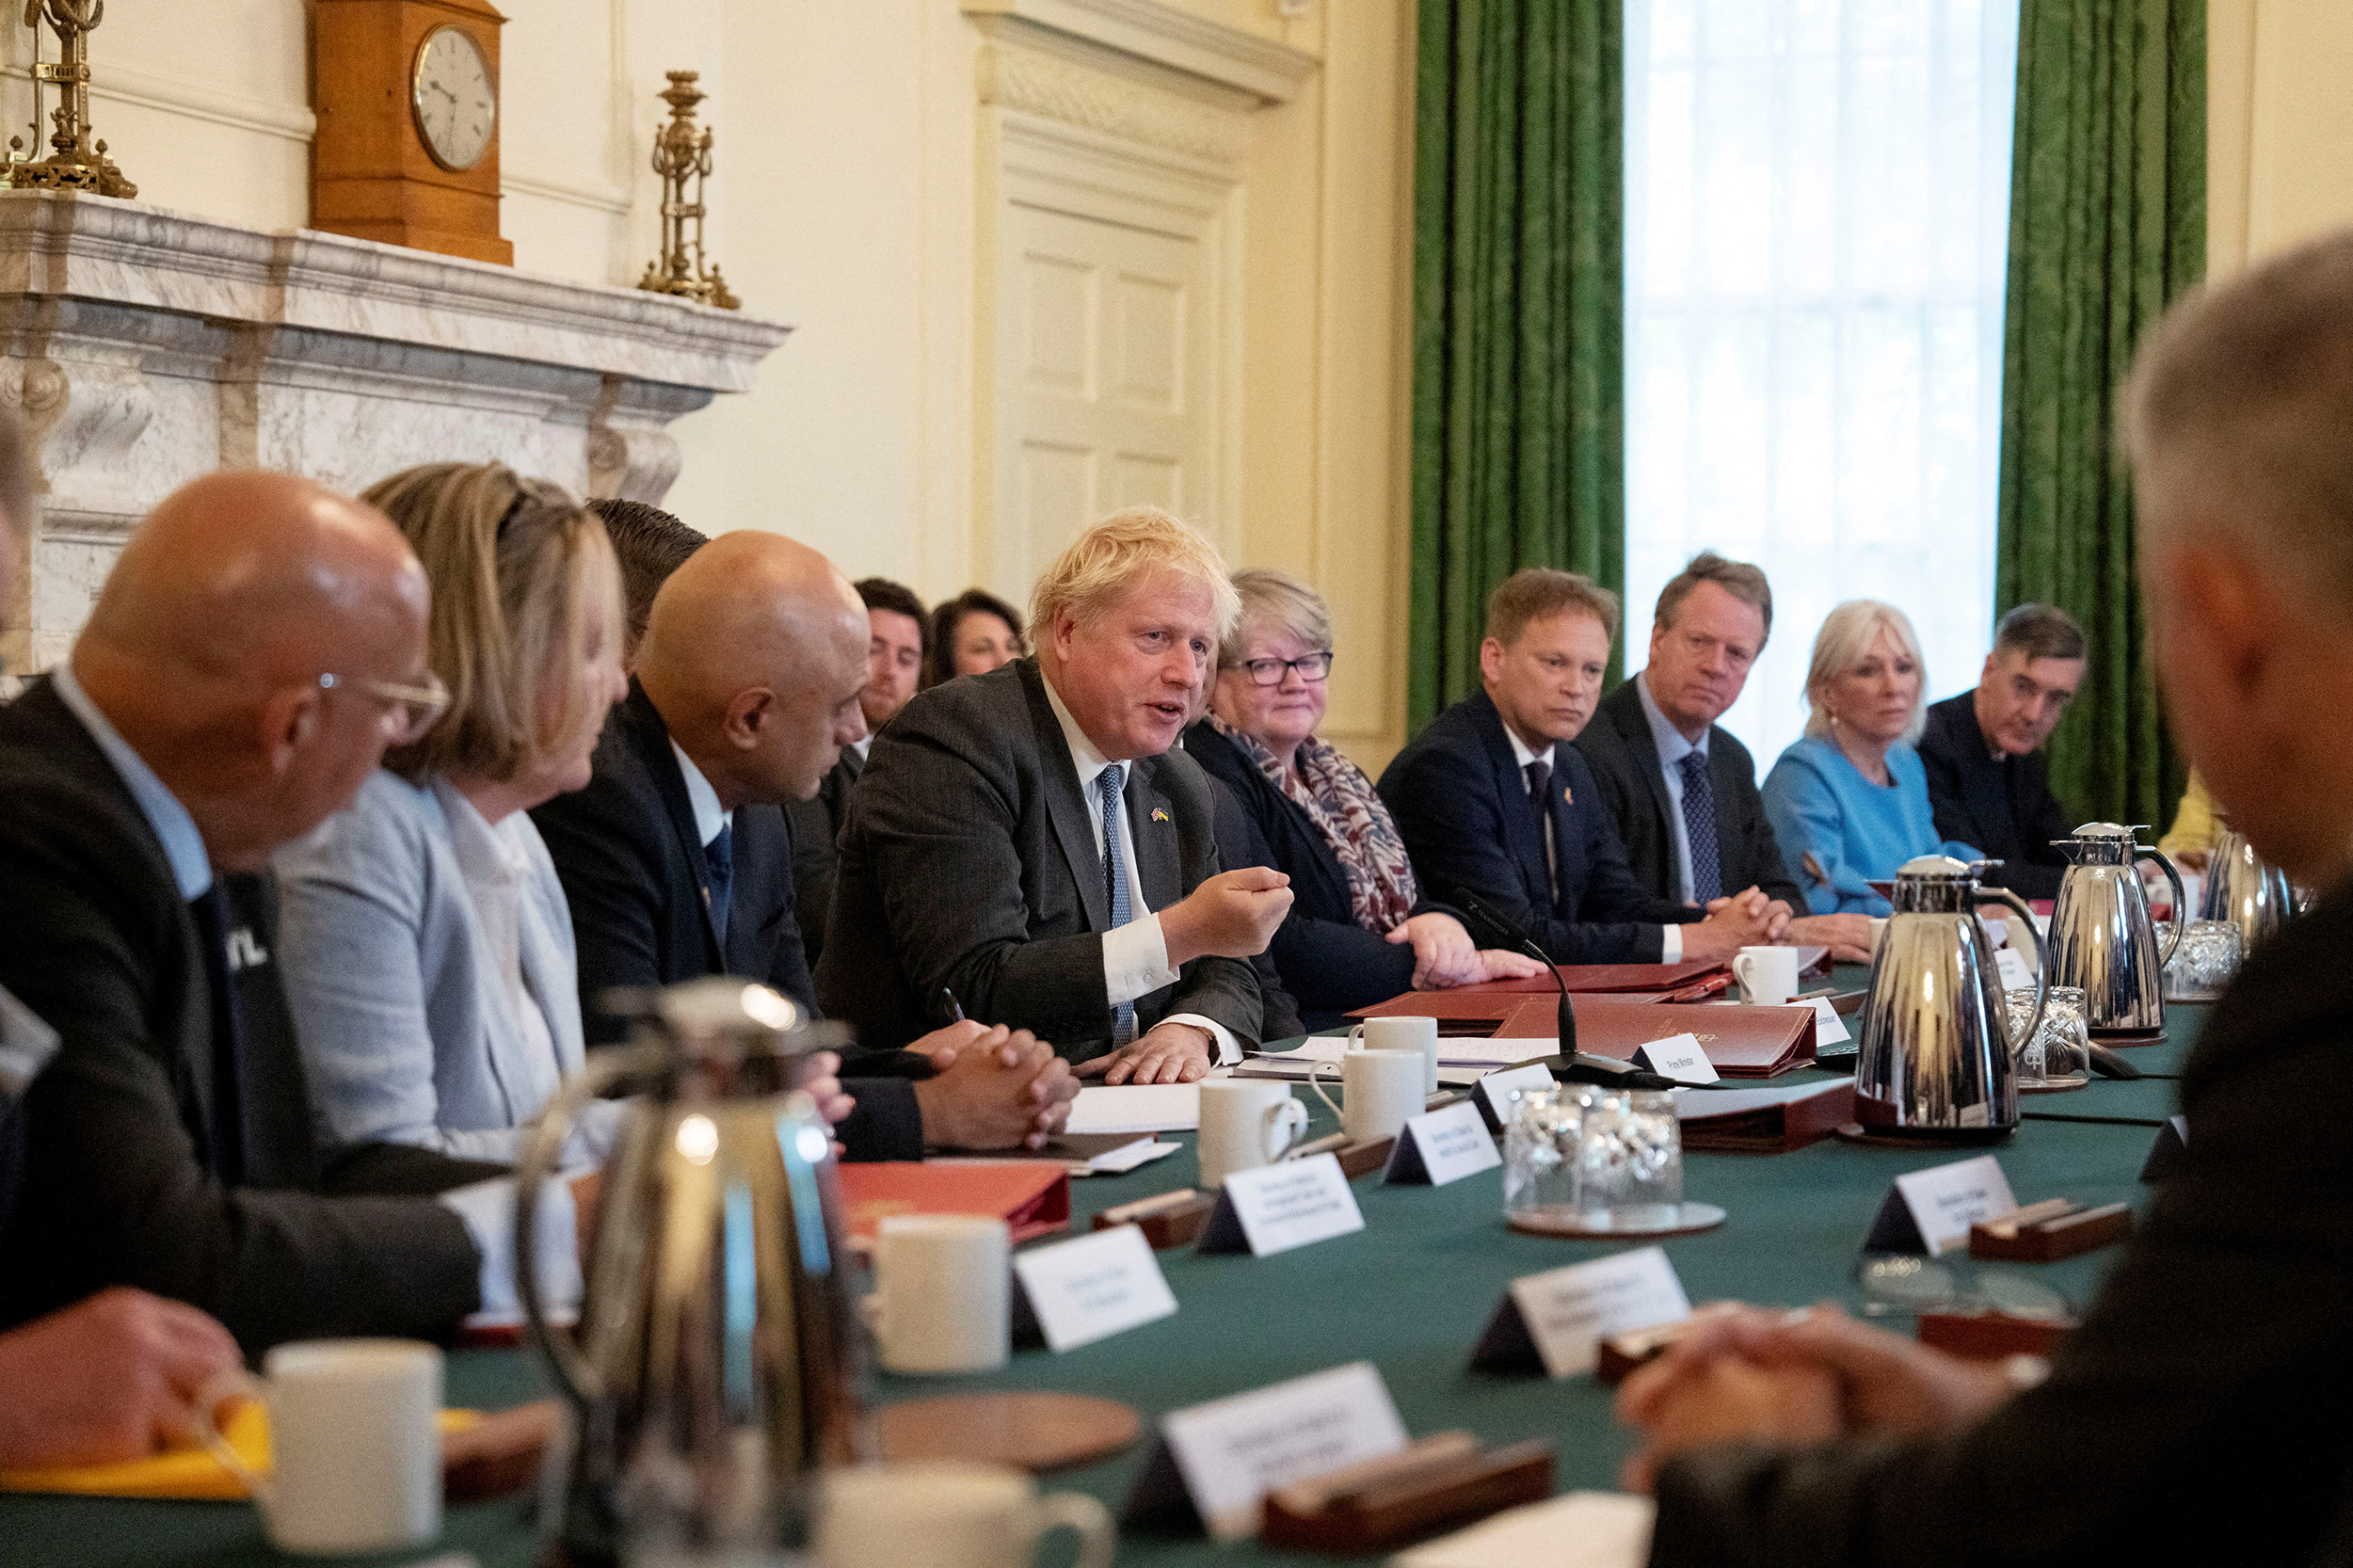 British Prime Minister Boris Johnson, center, holds court during a cabinet meeting in Downing Street in London, England, on June 21.